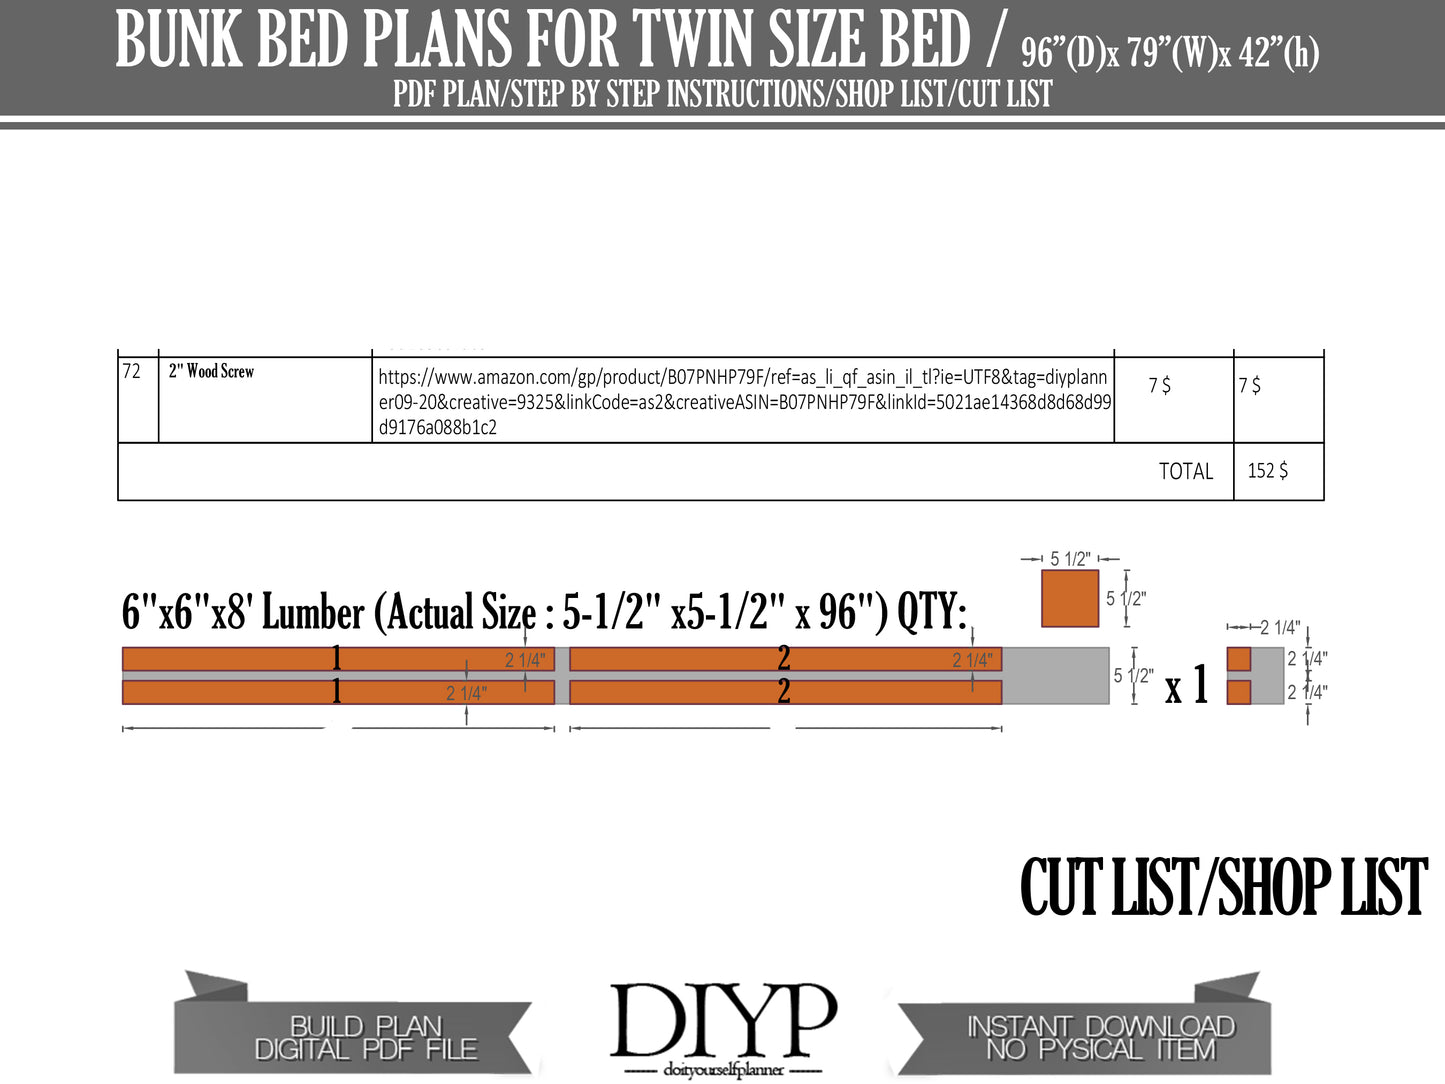 Adventure Awaits: DIY Twin Size Bunk Bed Plans with Slides | Craftsmanship and Fun Combined